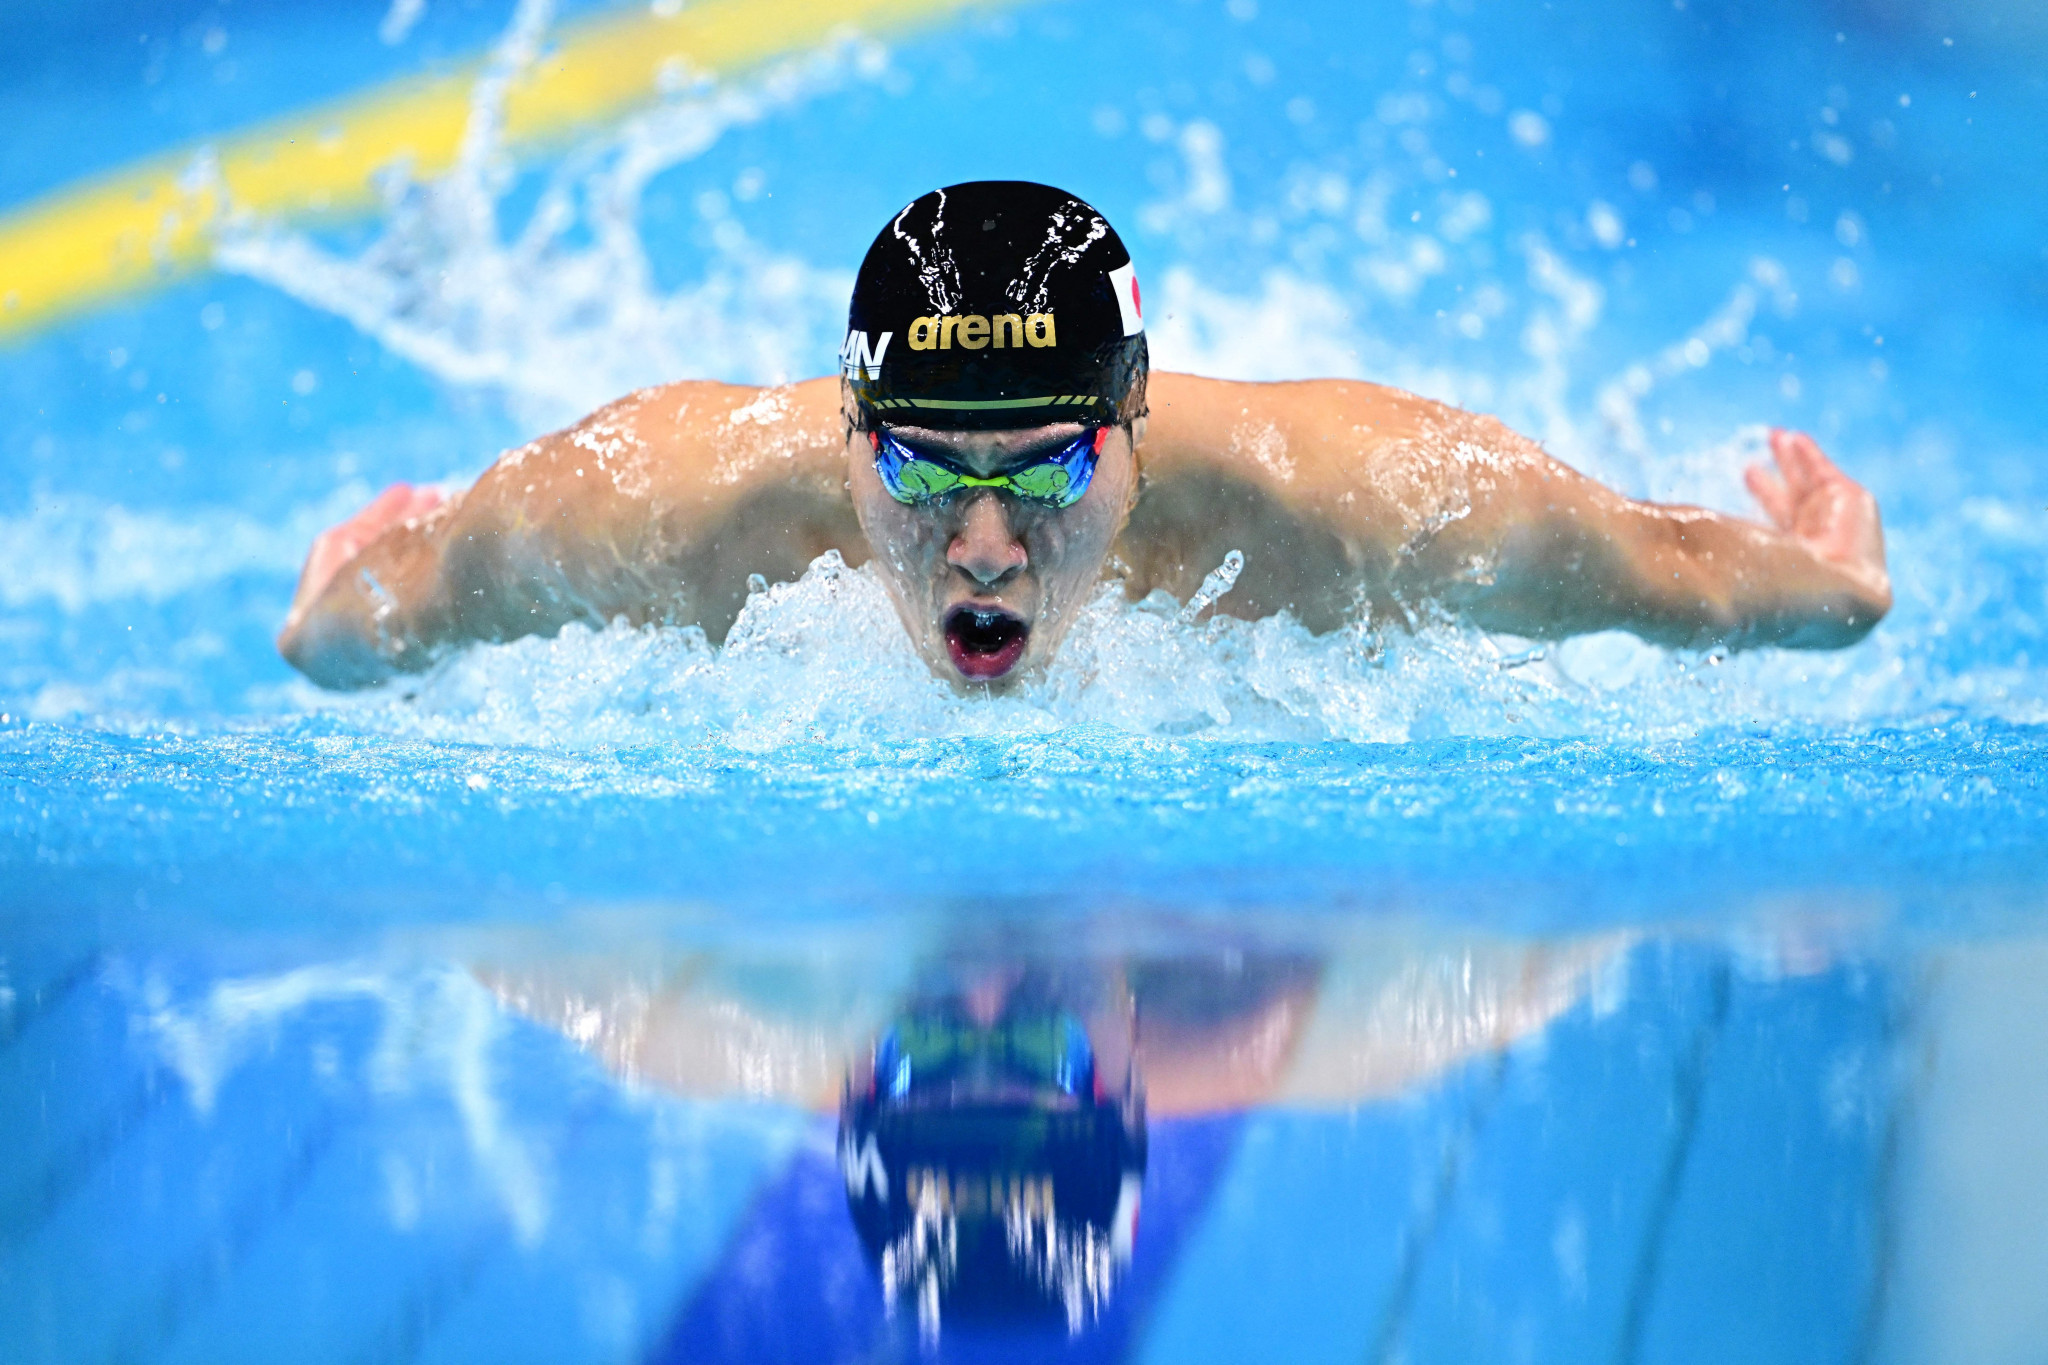 Japanese swimmer Tomoru Honda's 1:53.15 200m butterfly time was enough to seal the men's gold and break a 13-year-old world record ©Getty Images